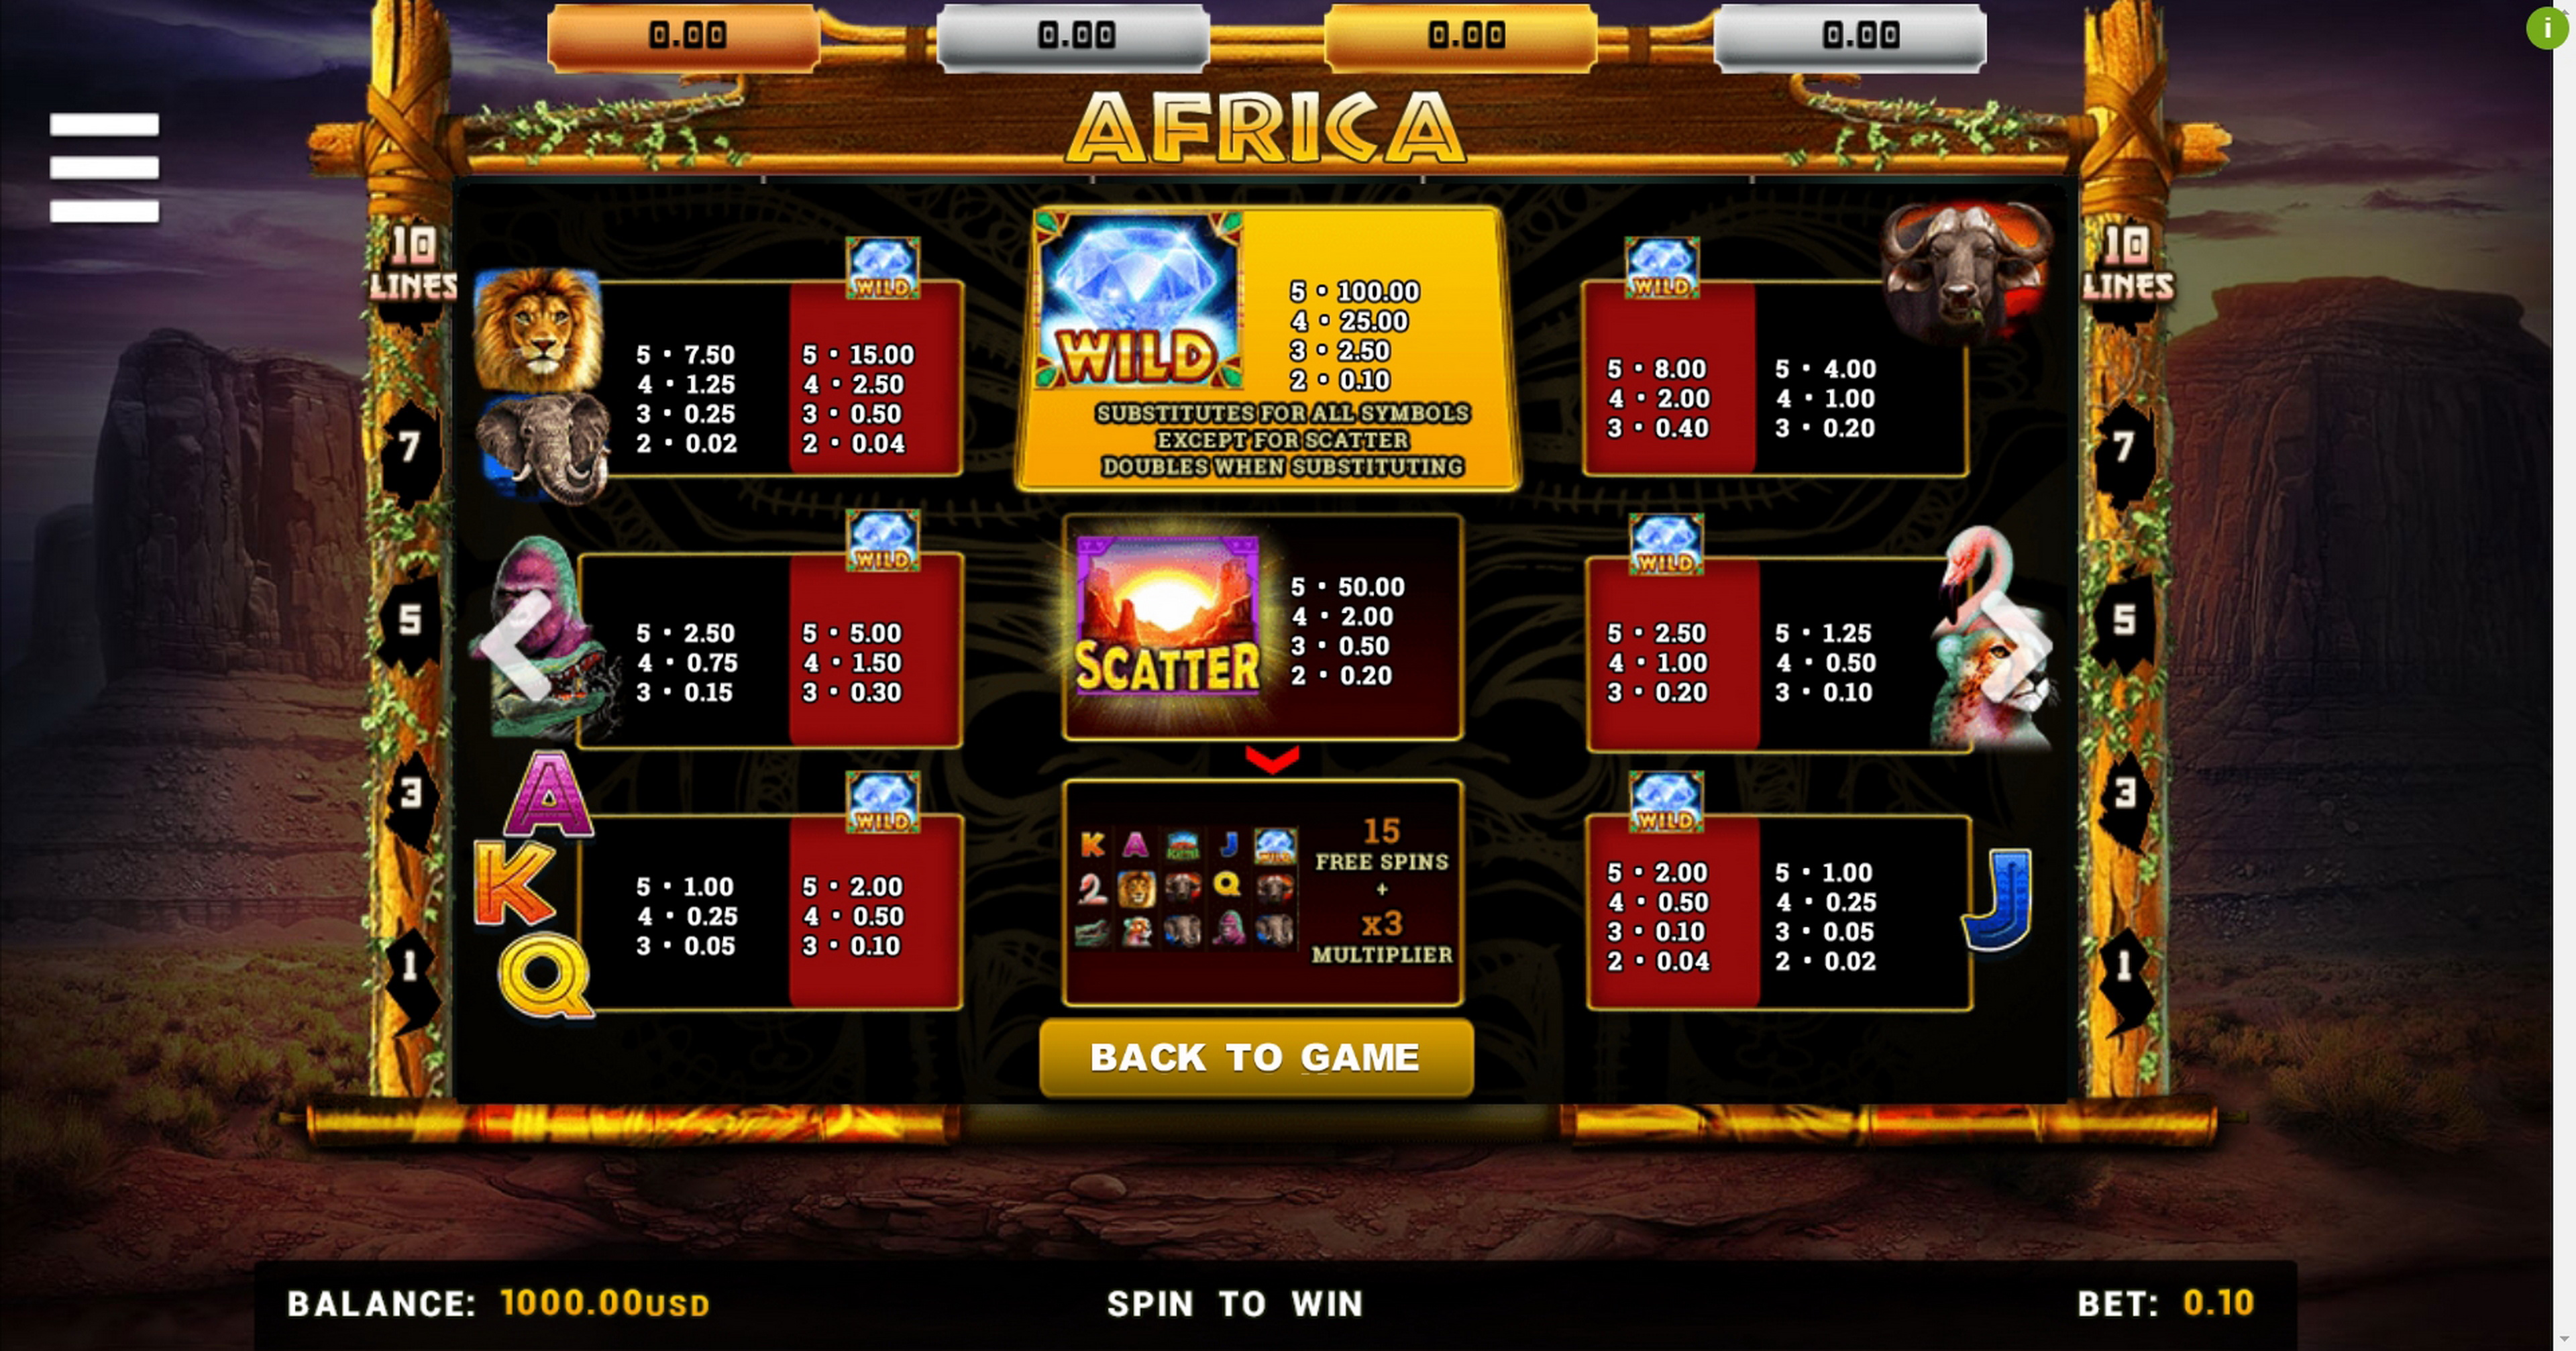 Info of Africa Slot Game by Betsense